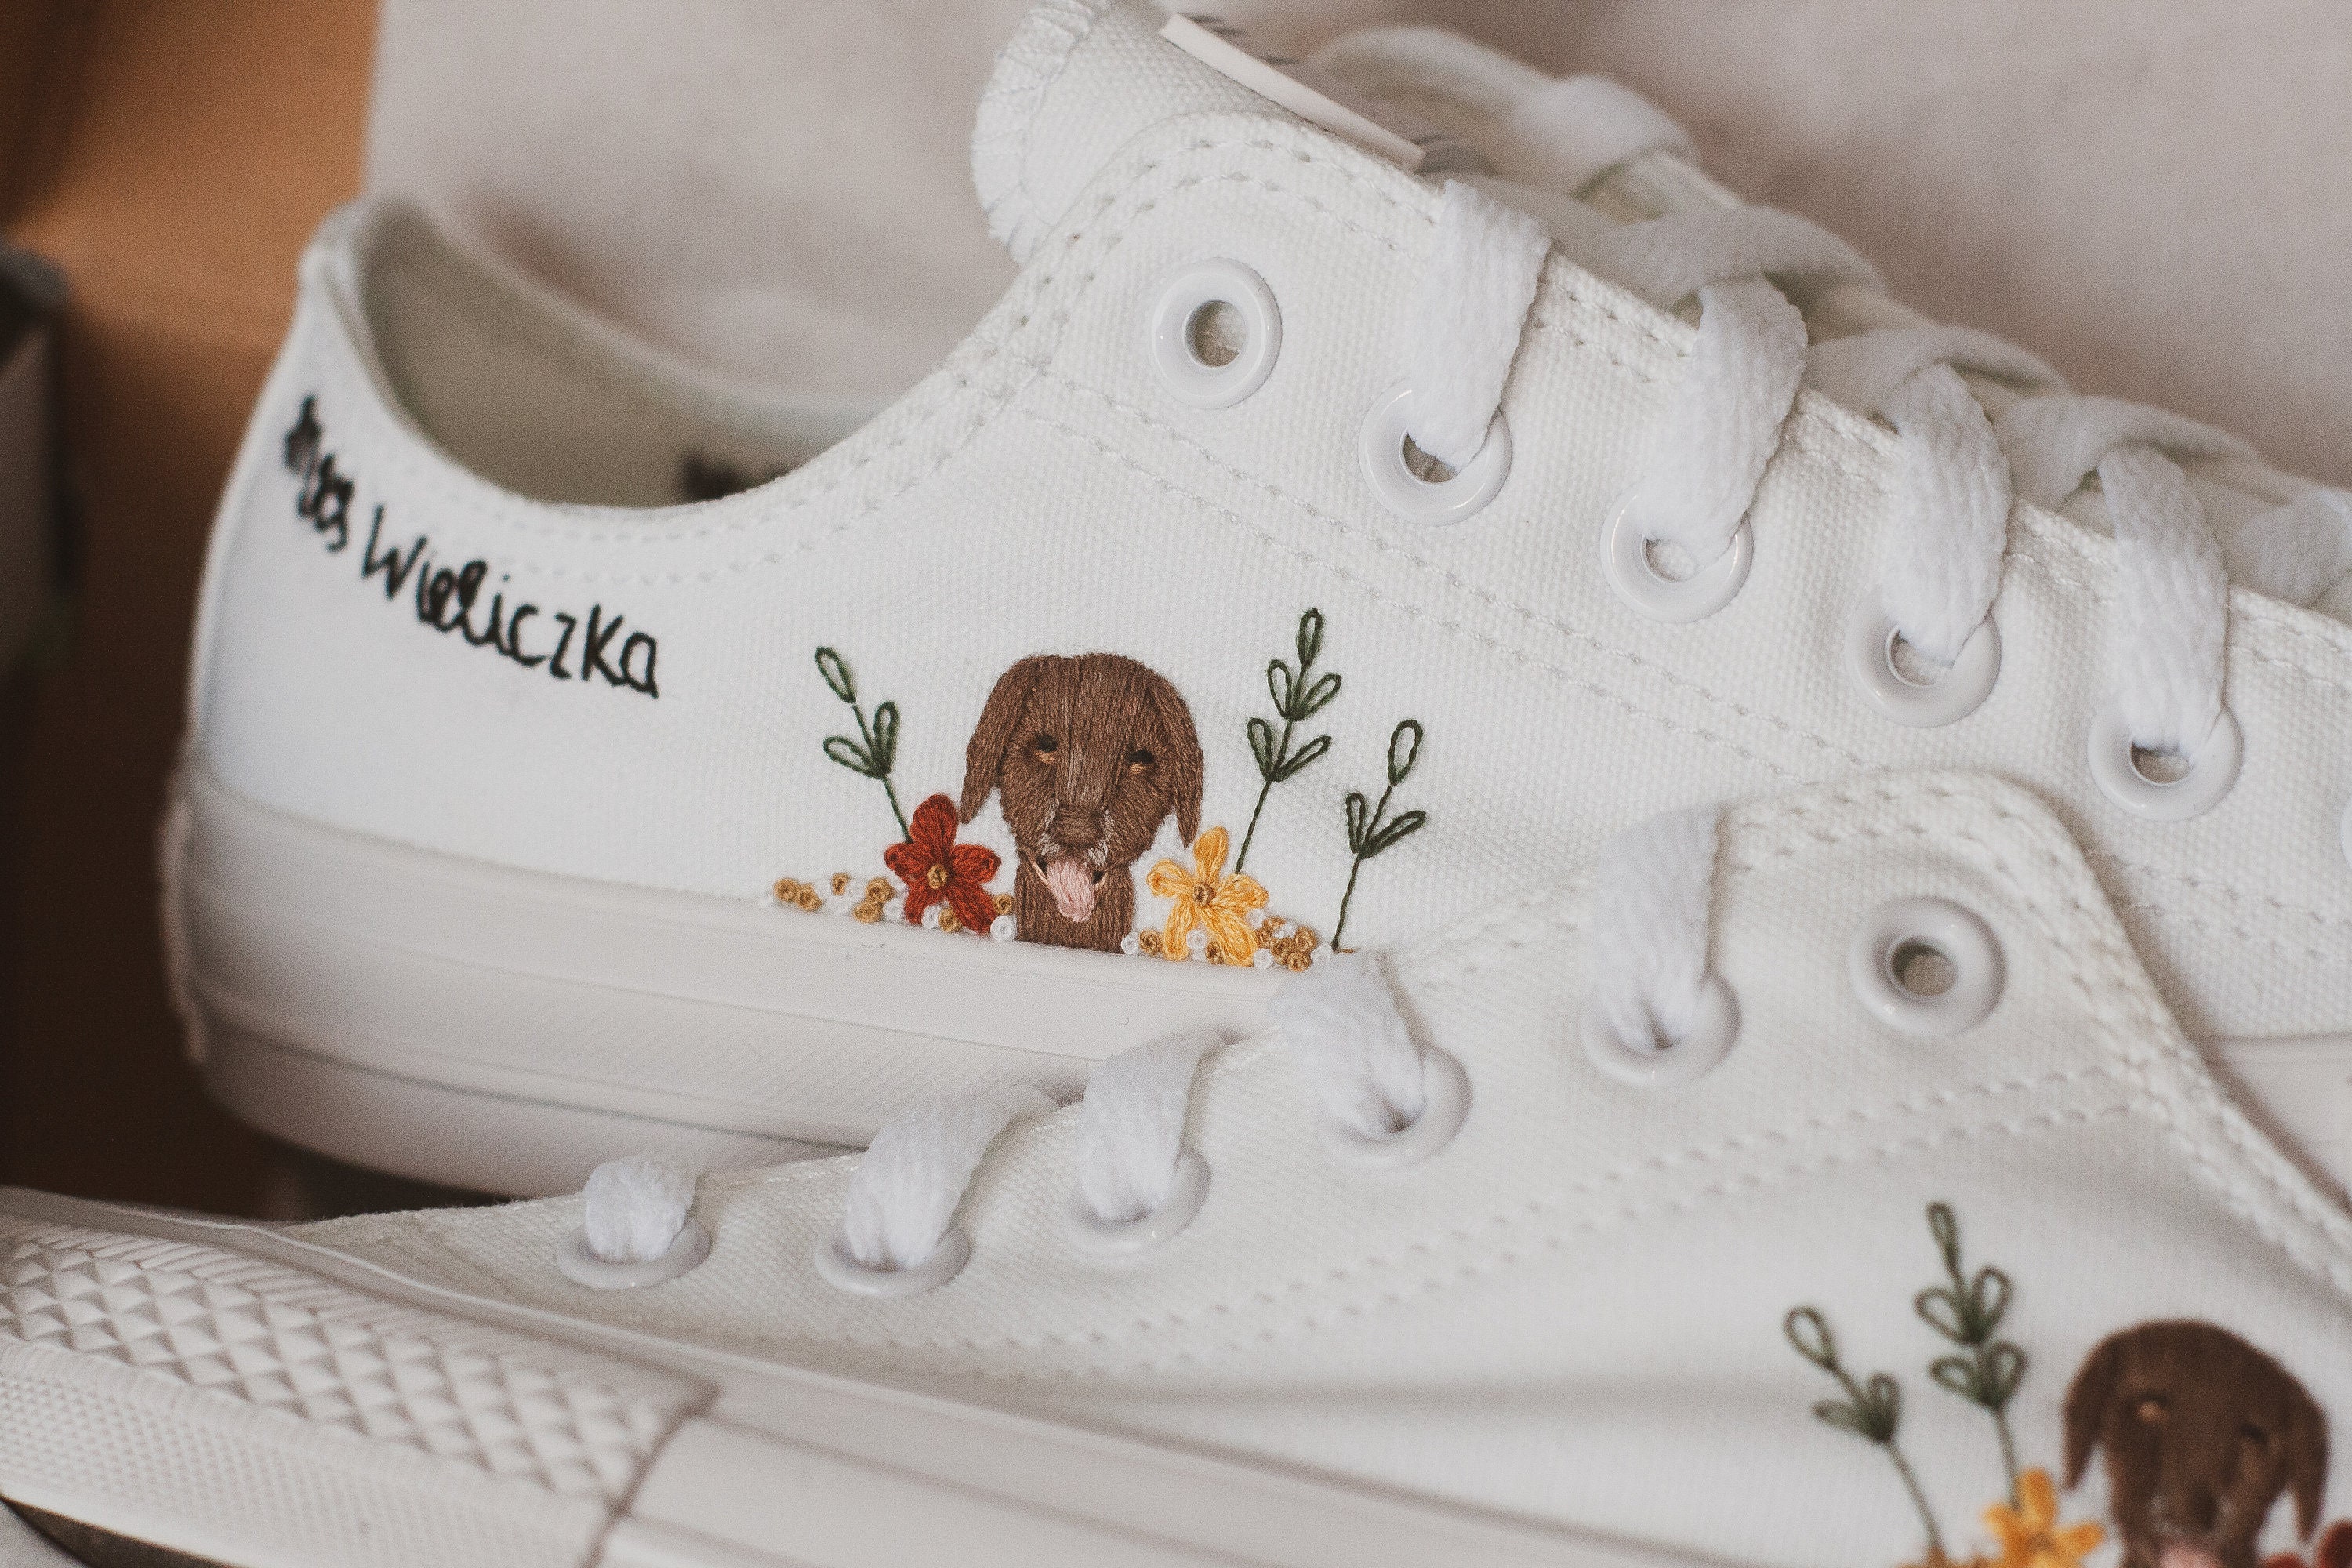 Converse Etsy Dog Pet Wedding Shoes Customizable Cat Wedding Bridal - Sneakers Embroidered Pet Embroidered & Sneakers Shoes Bridal Bride